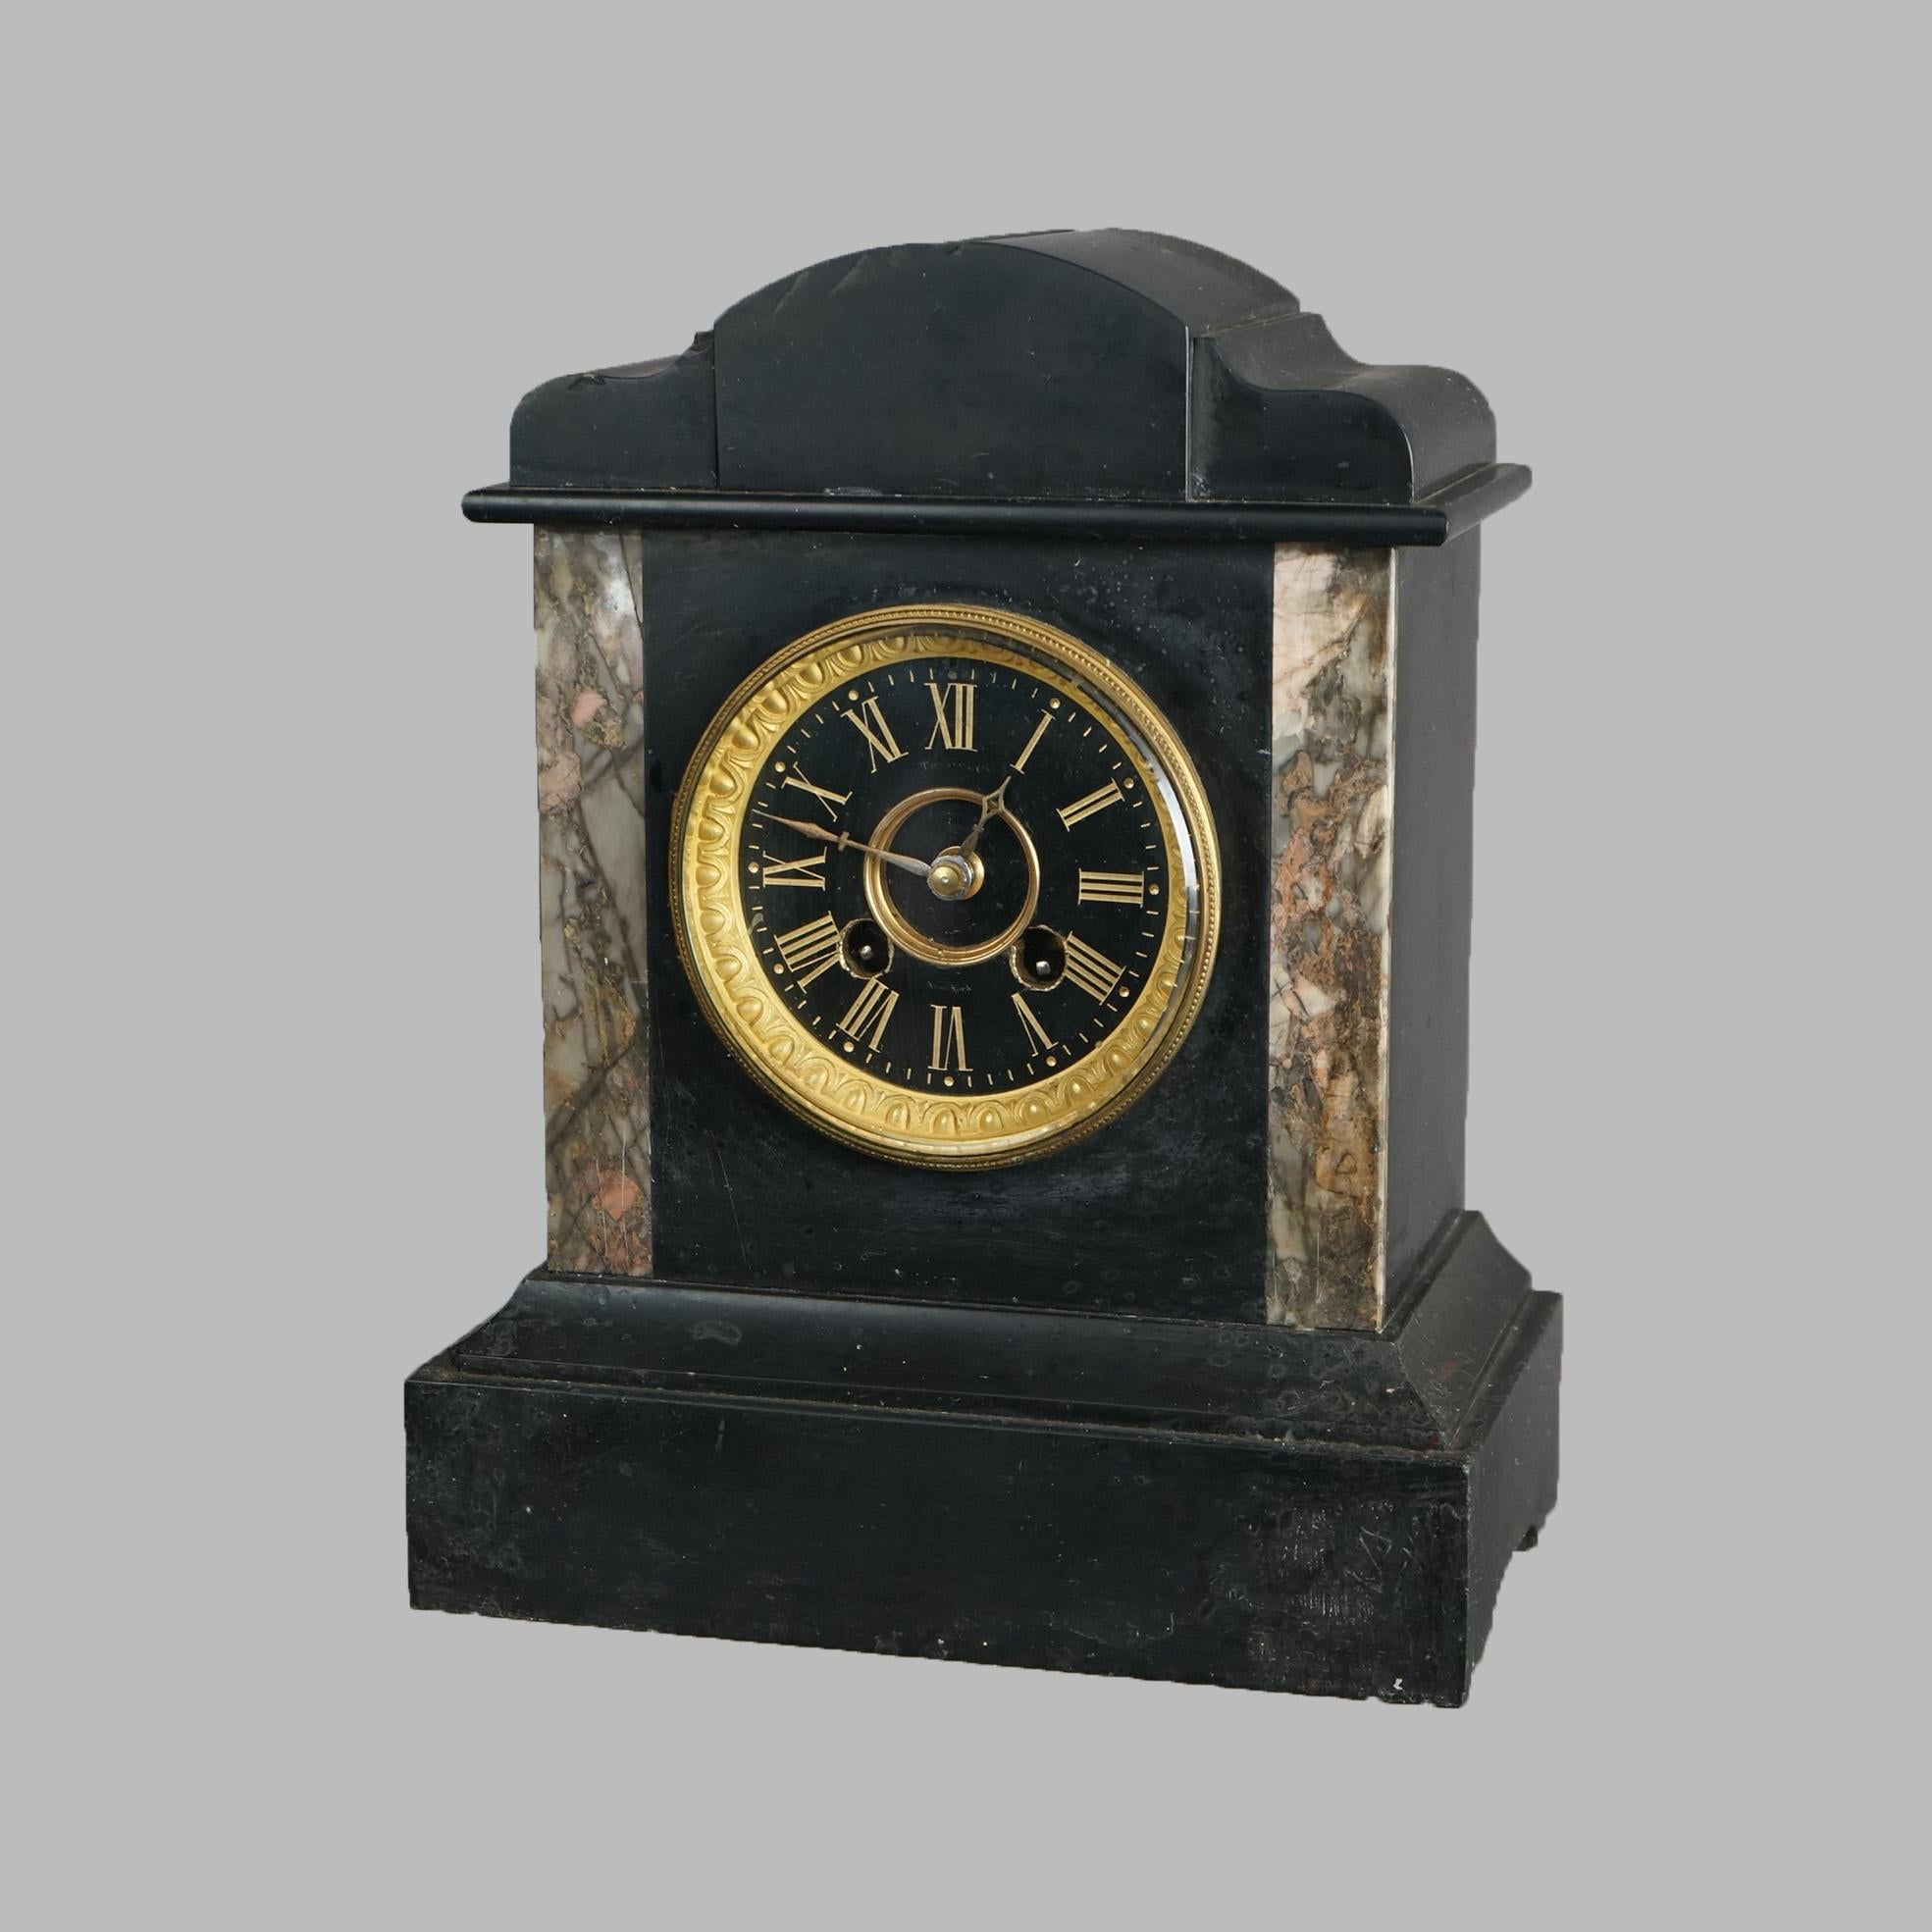 An antique Egyptian Revival mantel clock by Herschede offers slate case in architectural form and having marble facing, maker mark as photographed, c1890

Measures- 11.5''H x 9.25''W x 5.5''D